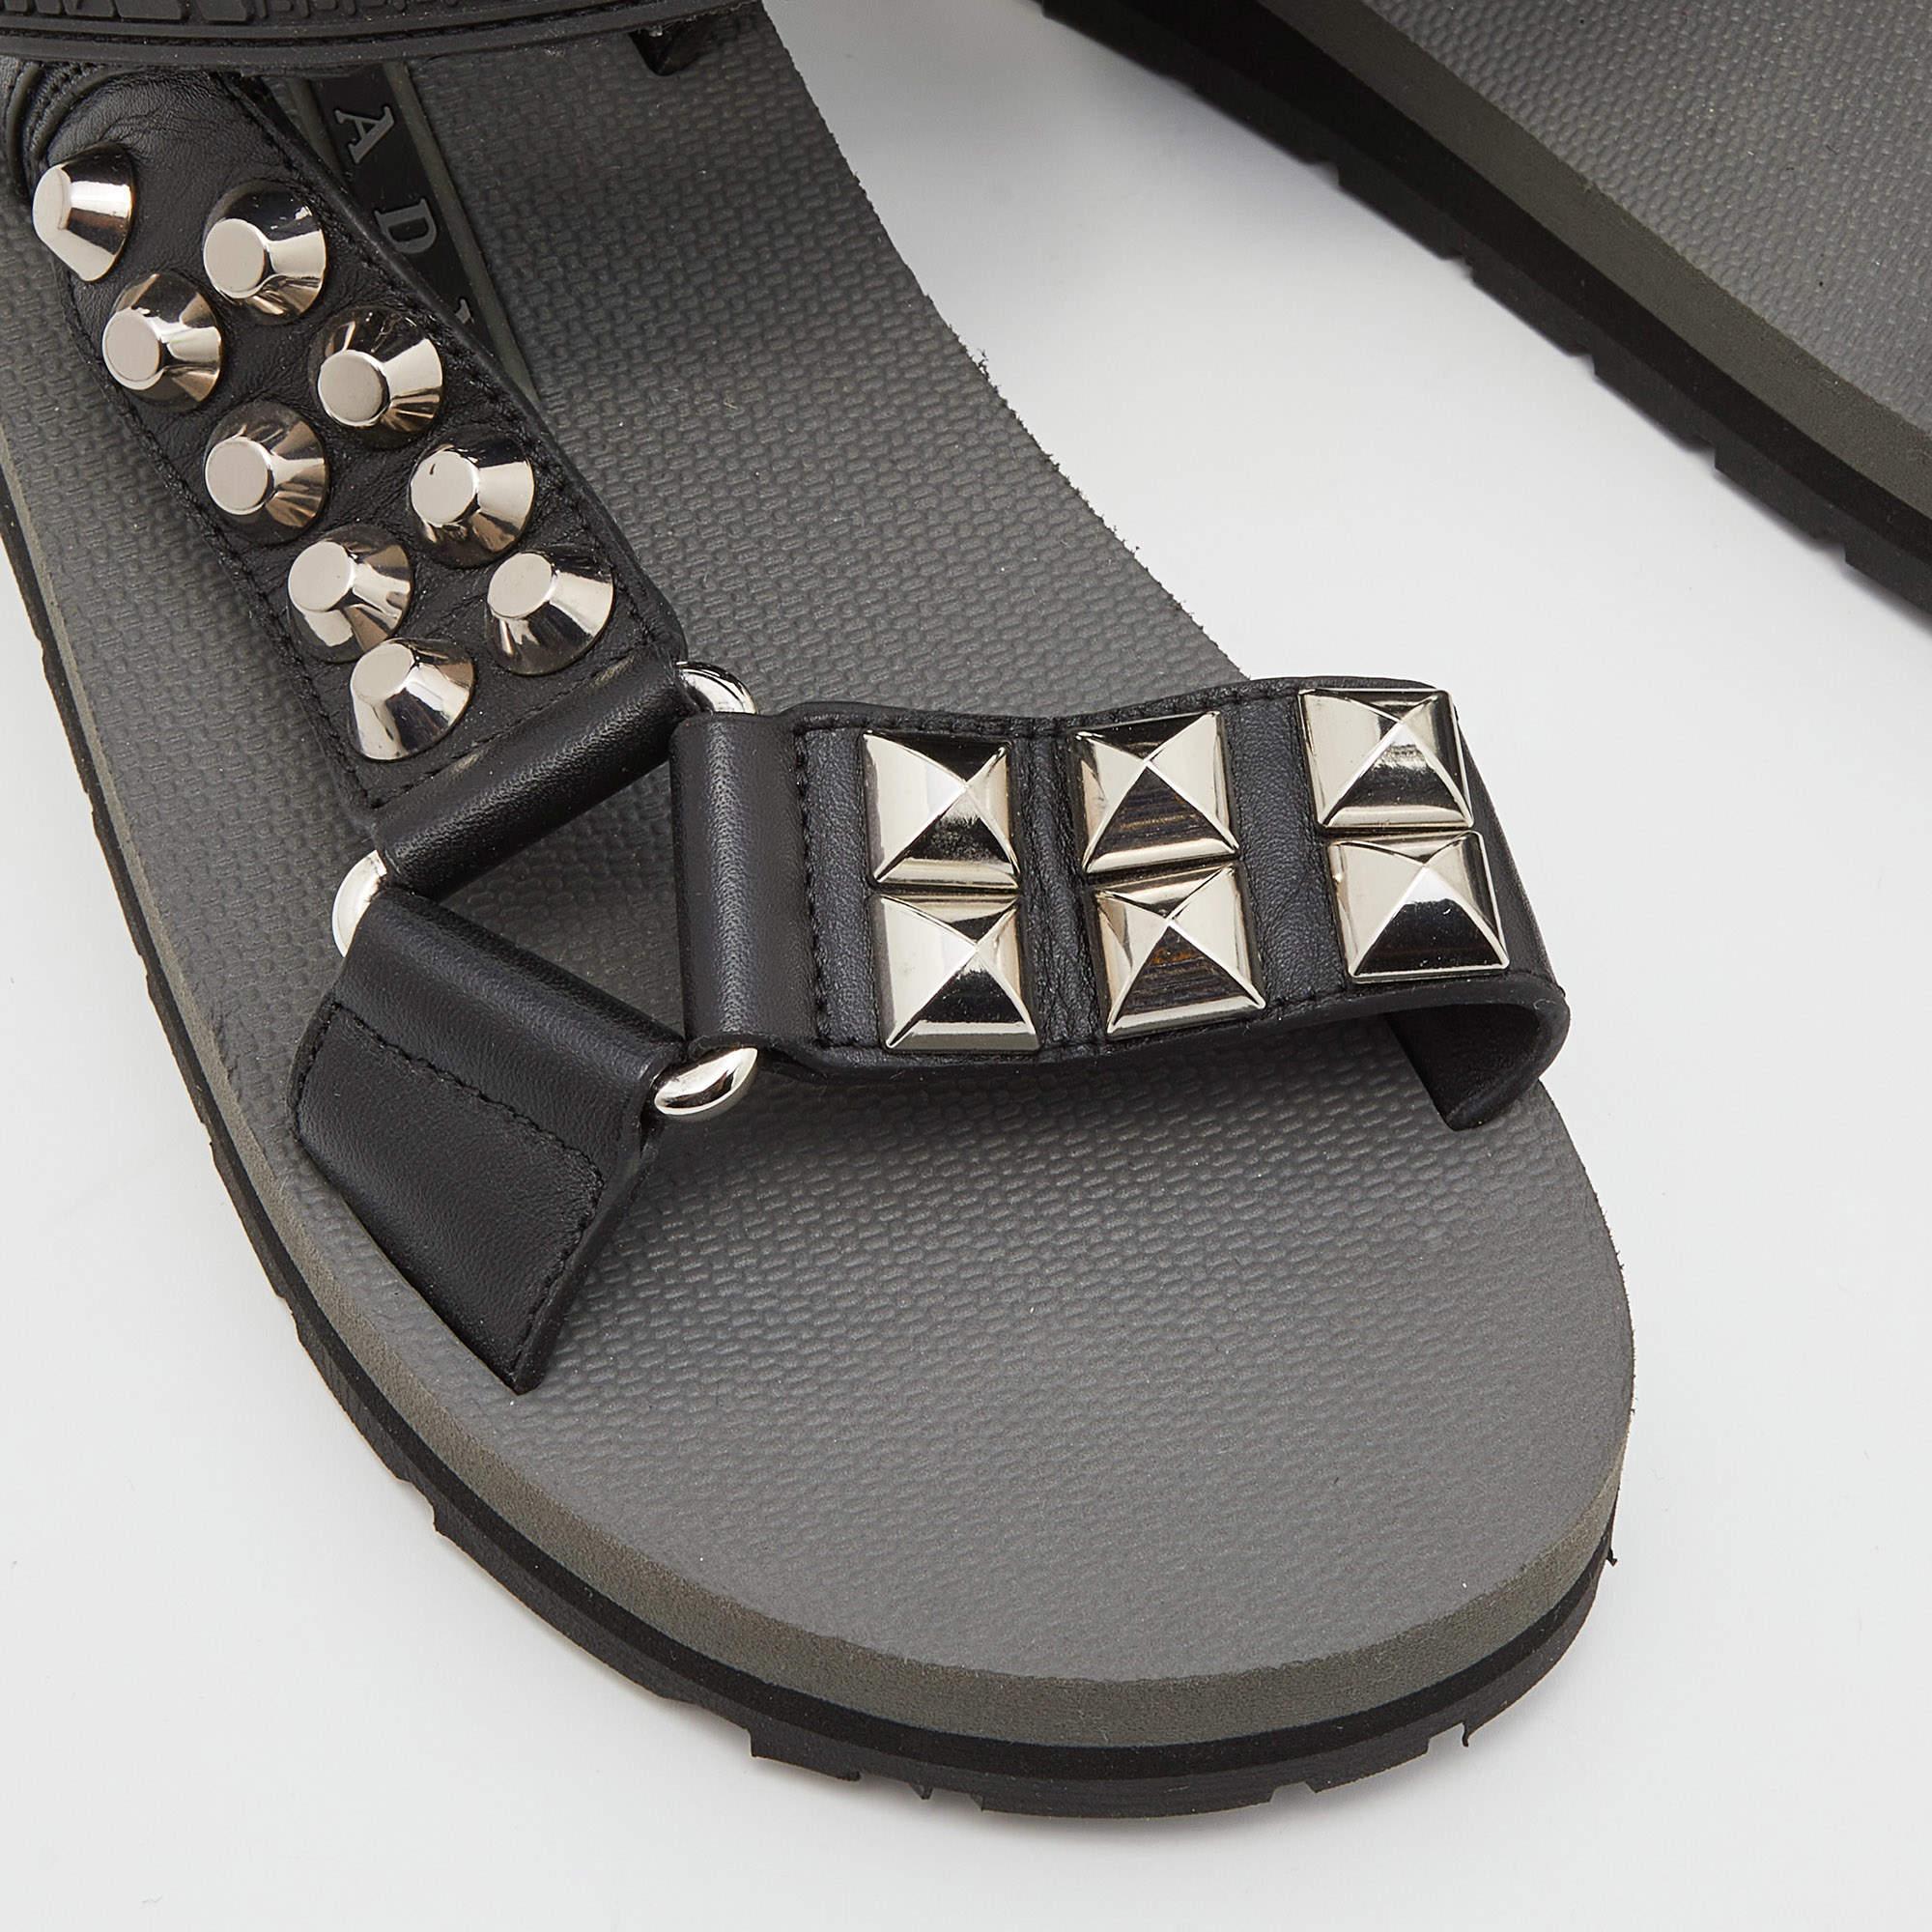 Prada Black Leather and Rubber Punk Stud Ankle Strap Flat Sandals Size 37.5 2